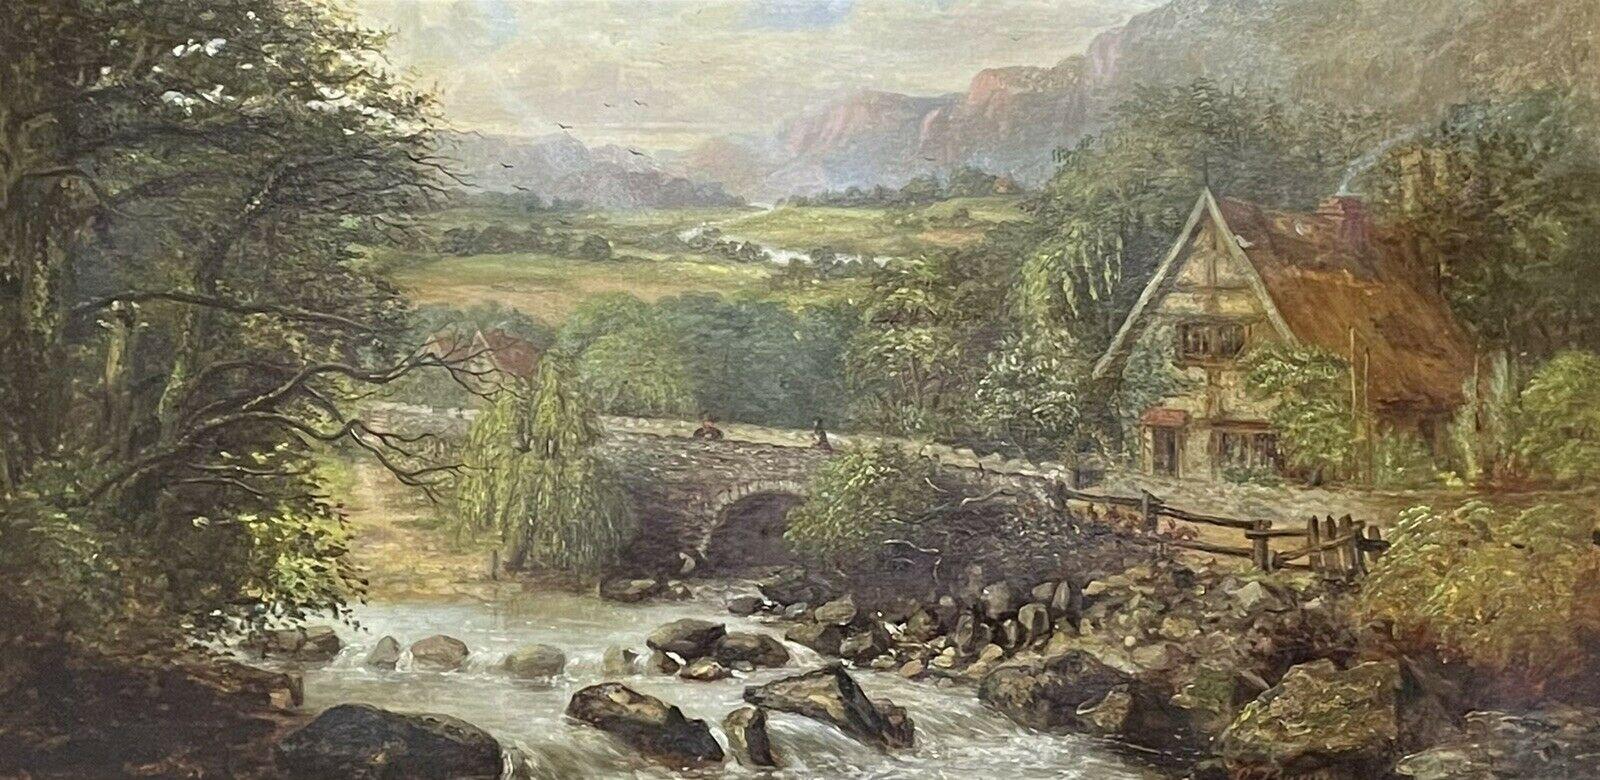 SIGNED VICTORIAN FRAMED OIL PAINTING - MOUNTAINOUS RIVER LANDSCAPE WITH FIGURES - Painting by Victorian signed